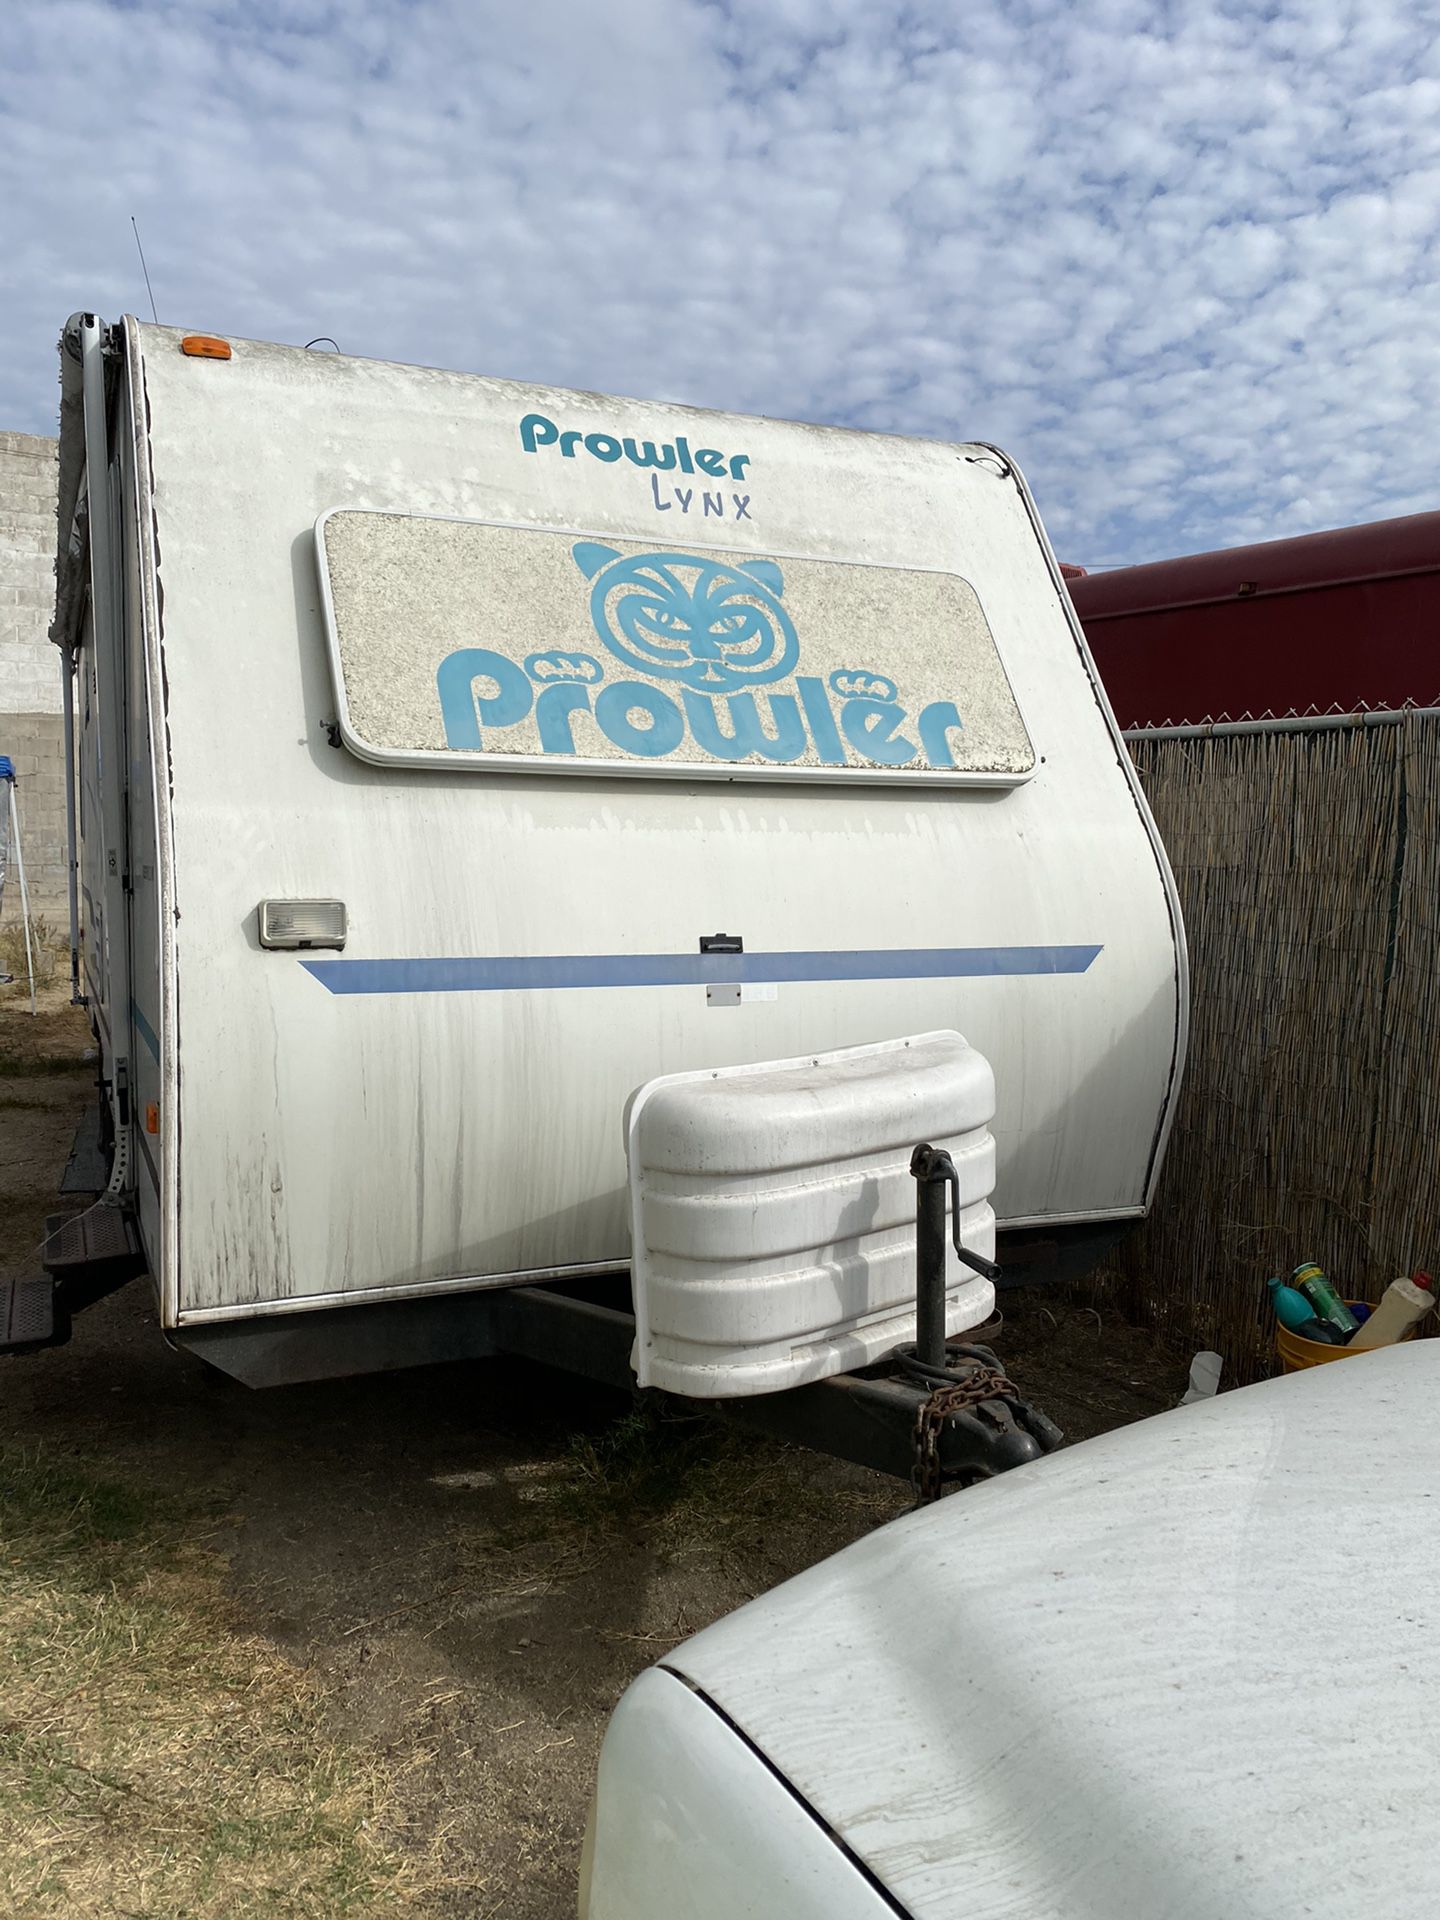 2002 Lynx Prowler Slide out dining room this is a 25 foot trailer